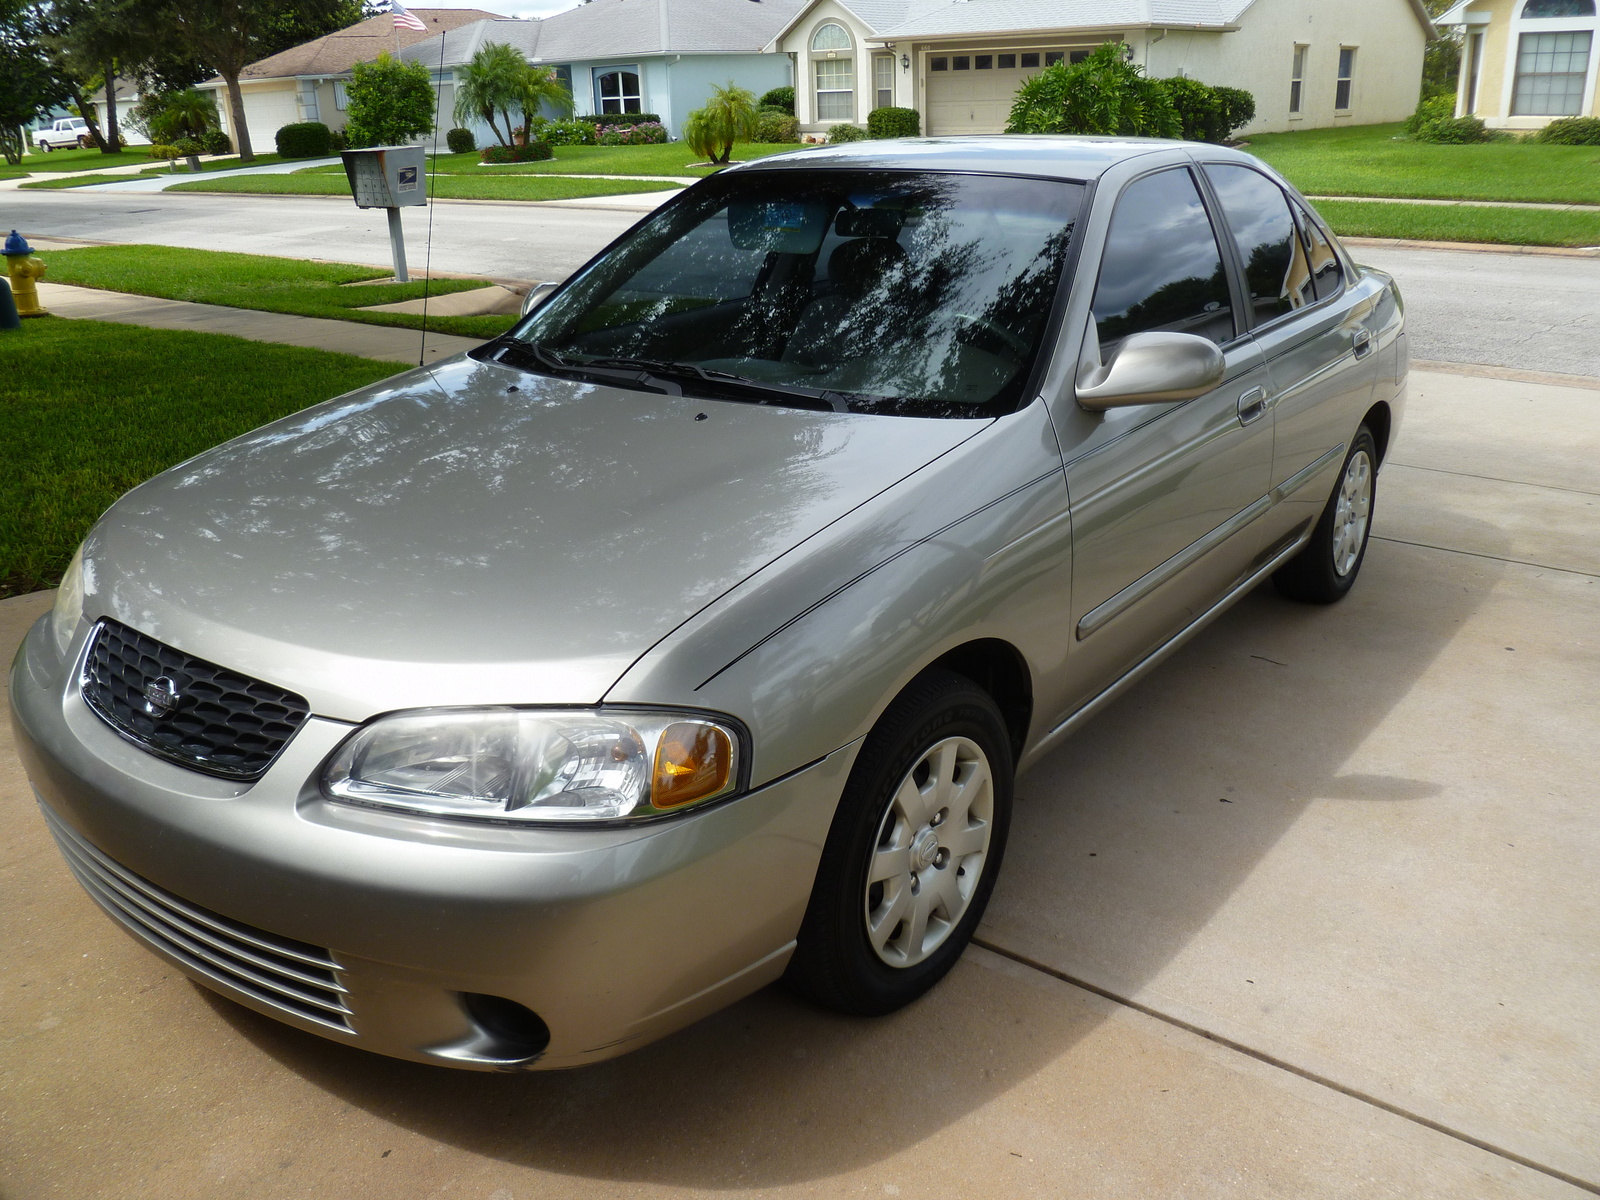 2001 Nissan sentra gxe specifications #5